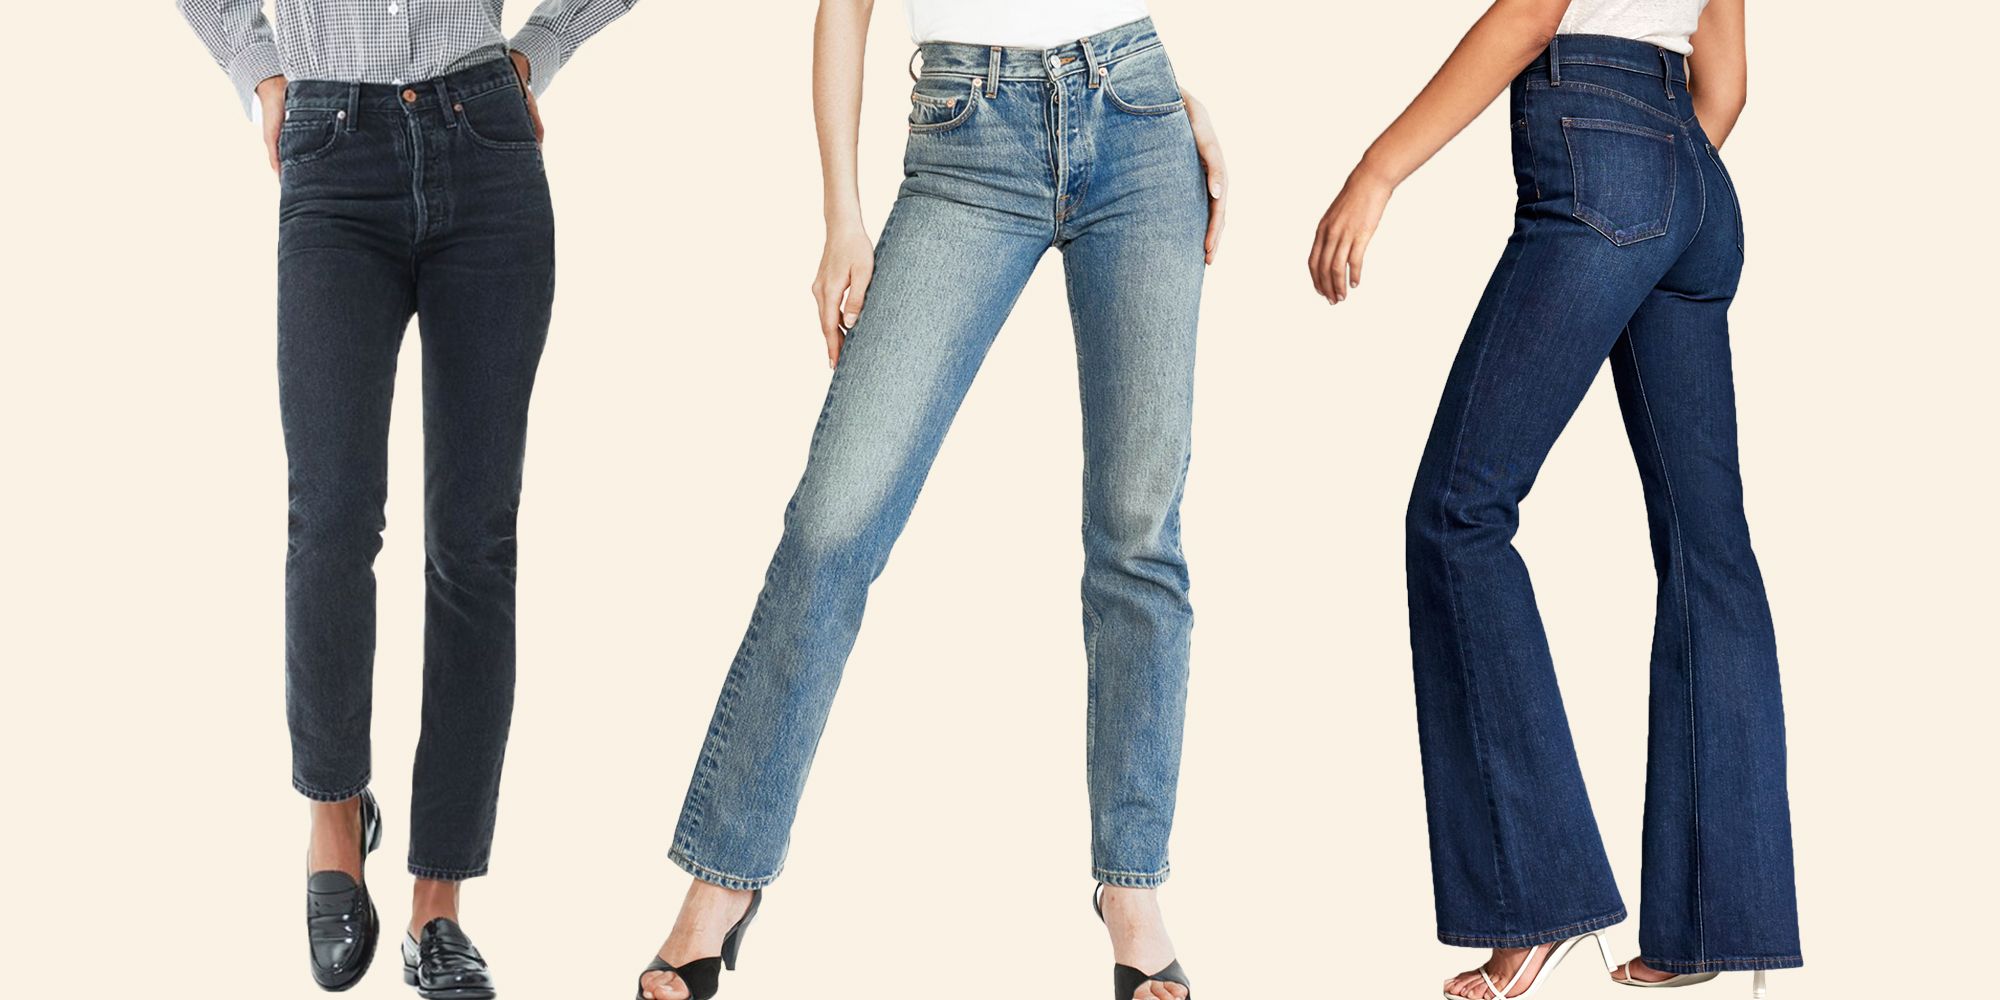 The Best Jeans For Tall Women - The Best 7 Jeans for Really Tall Women that  Actually Fit